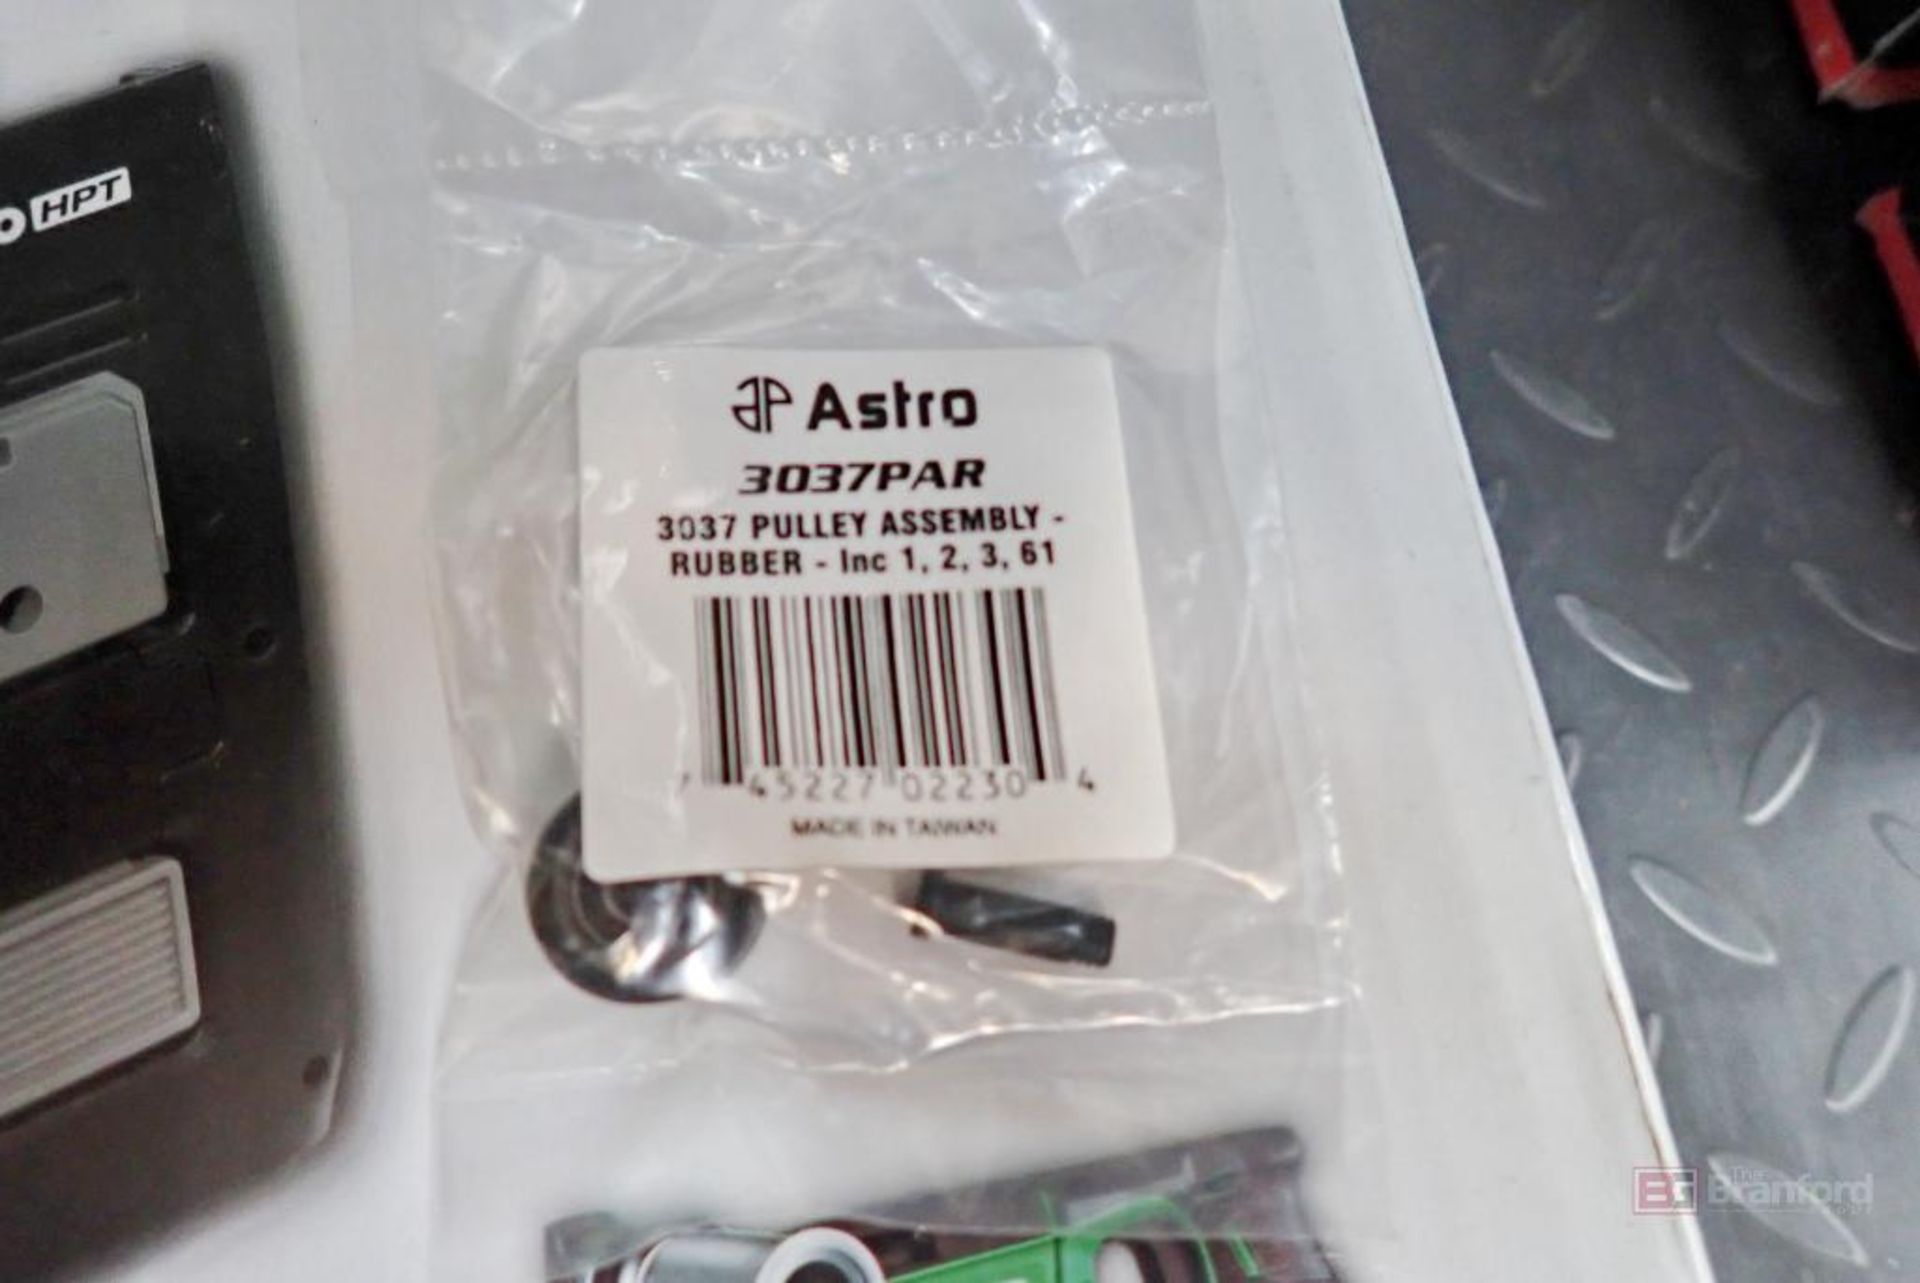 Box Lot of Astro 3037PAR Pulley Assemblies - Image 9 of 10